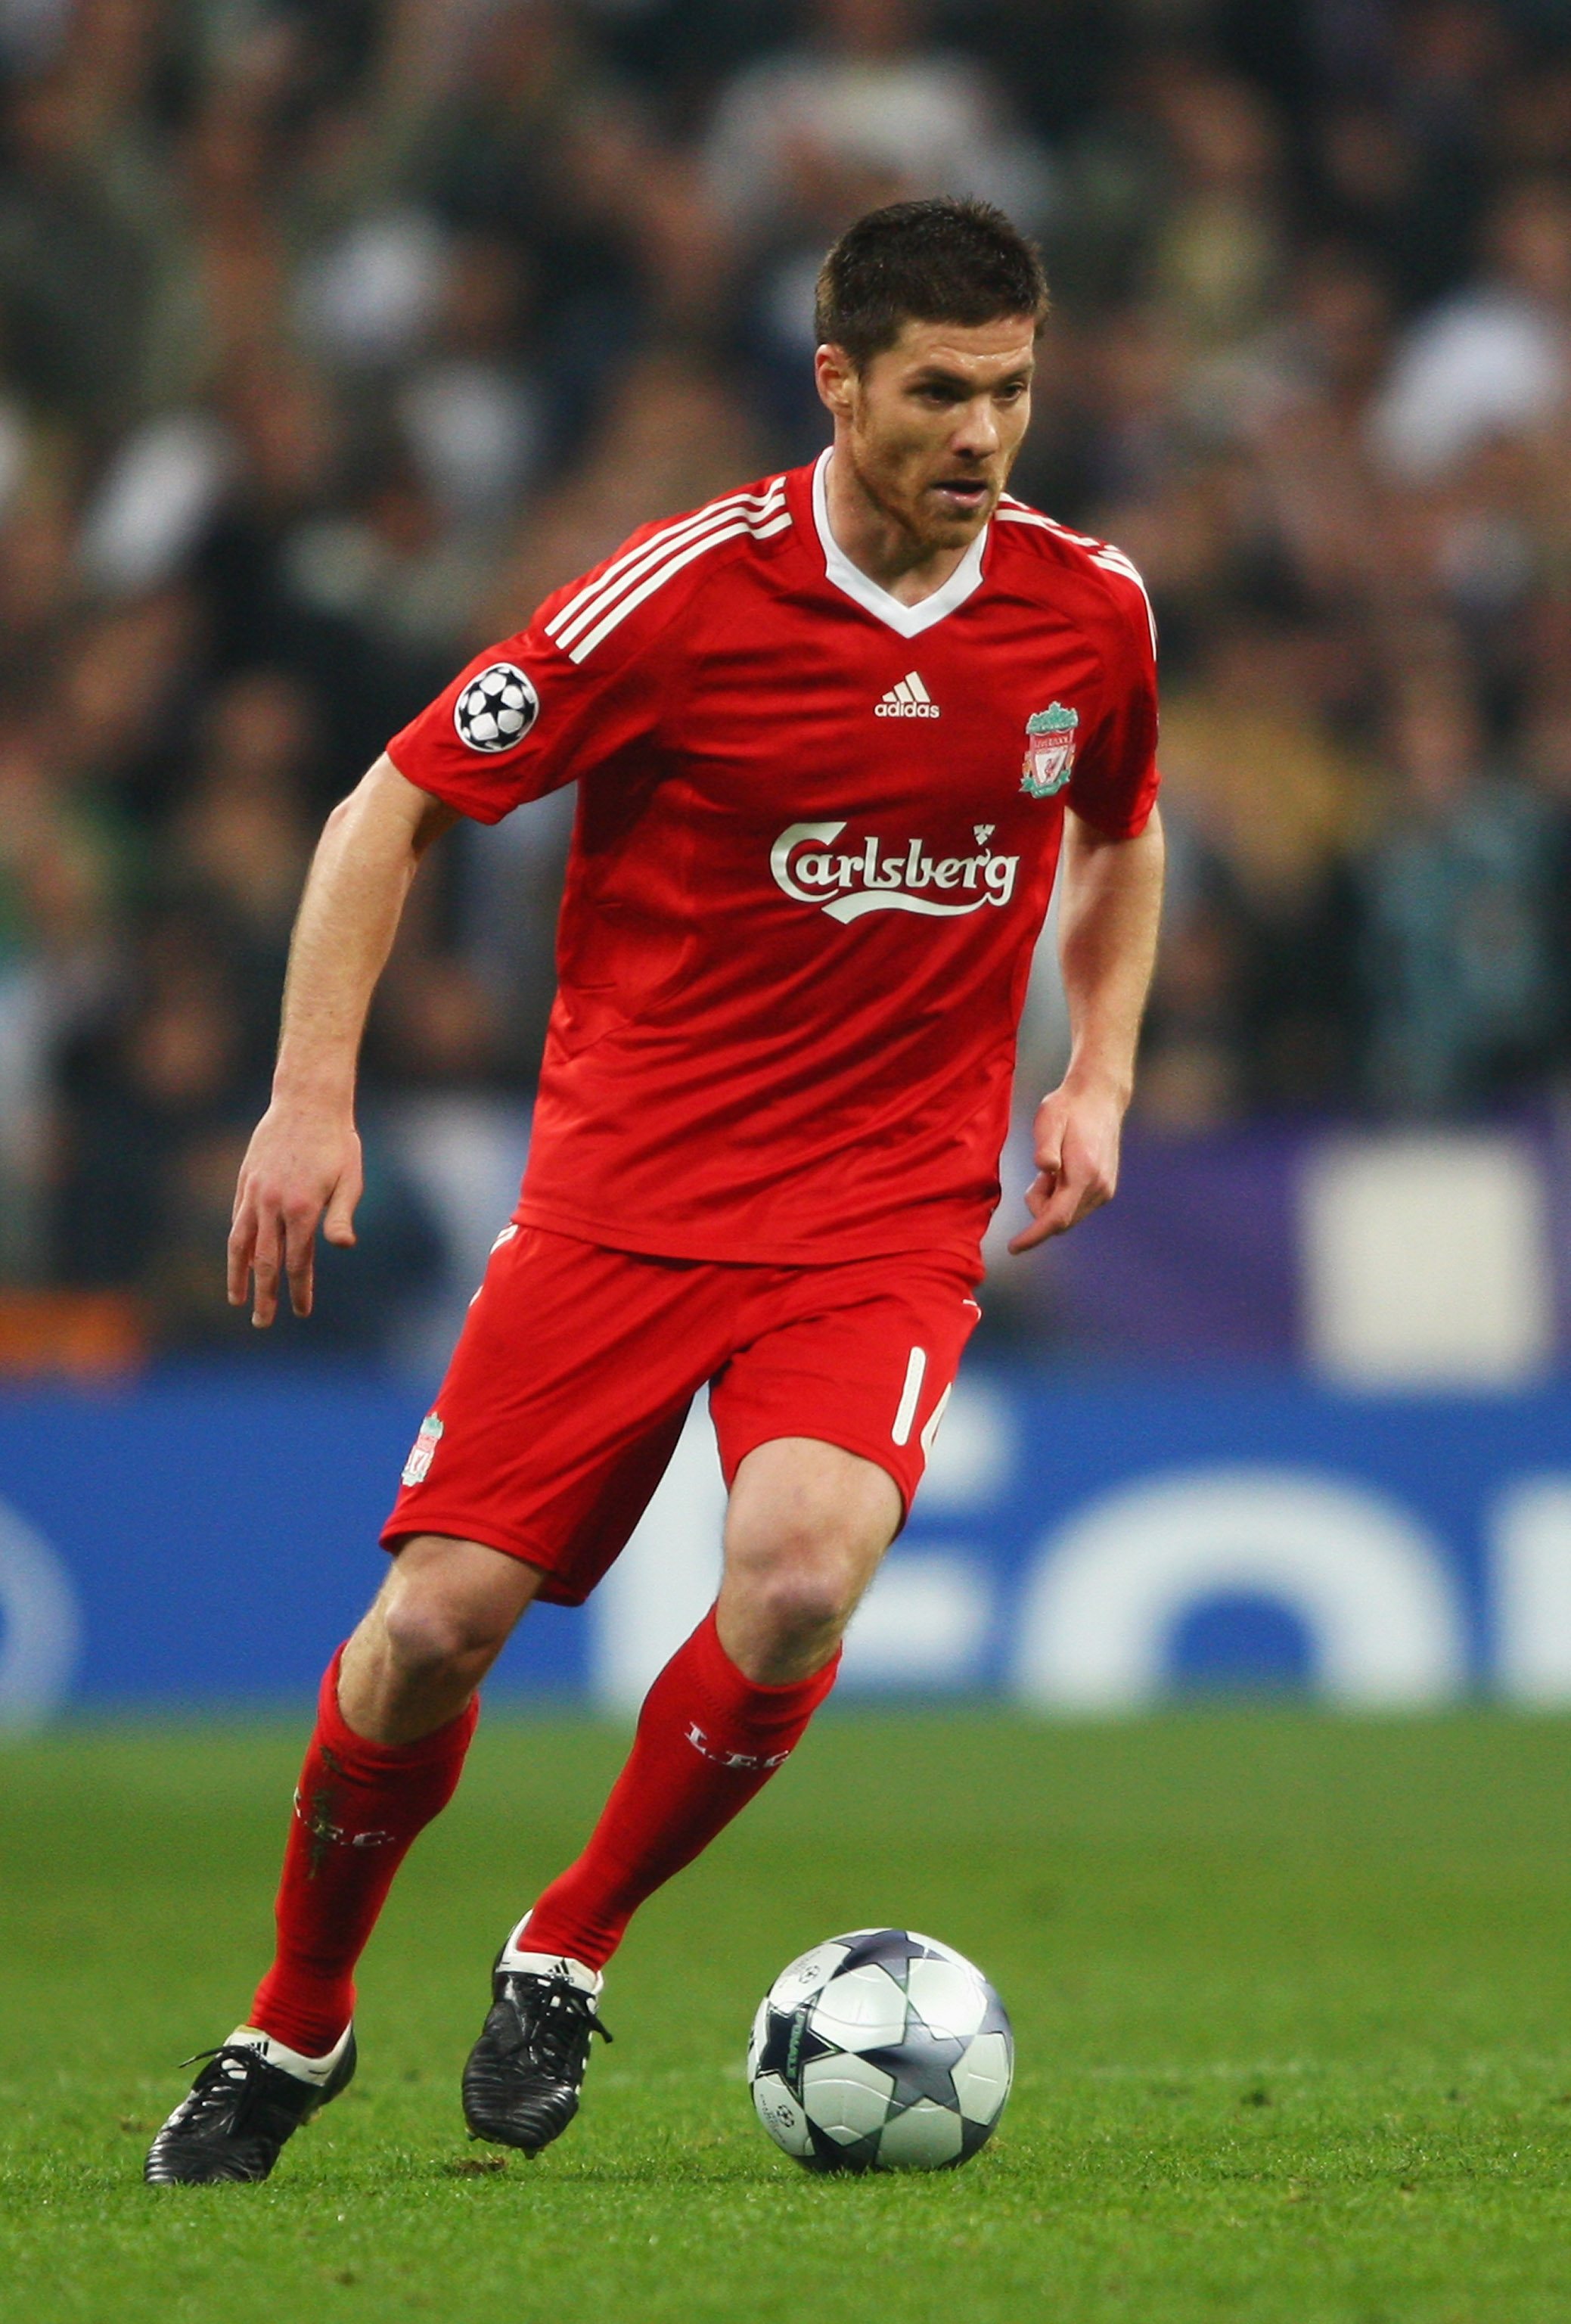 MADRID, SPAIN - FEBRUARY 25:  Xabi Alonso of Liverpool in action during the Champions League Round of 16, First Leg match between Real Madrid and Liverpool at the Estadio Santiago Bernabeu on February 25, 2009 in Madrid, Spain.  (Photo by Clive Brunskill/